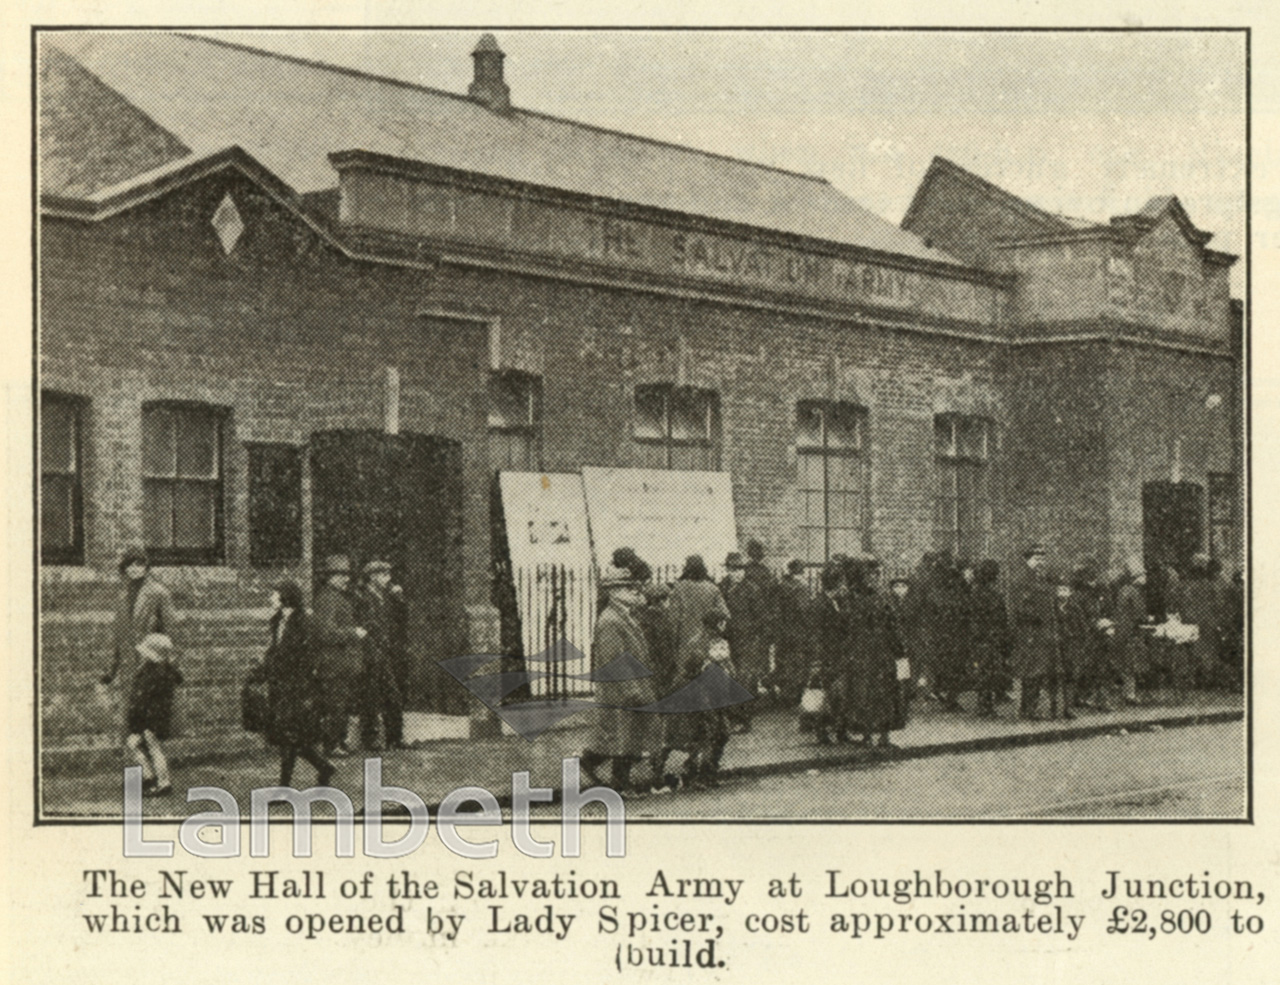 NEW HALL, SALVATION ARMY, LOUGHBOROUGH JUNCTION